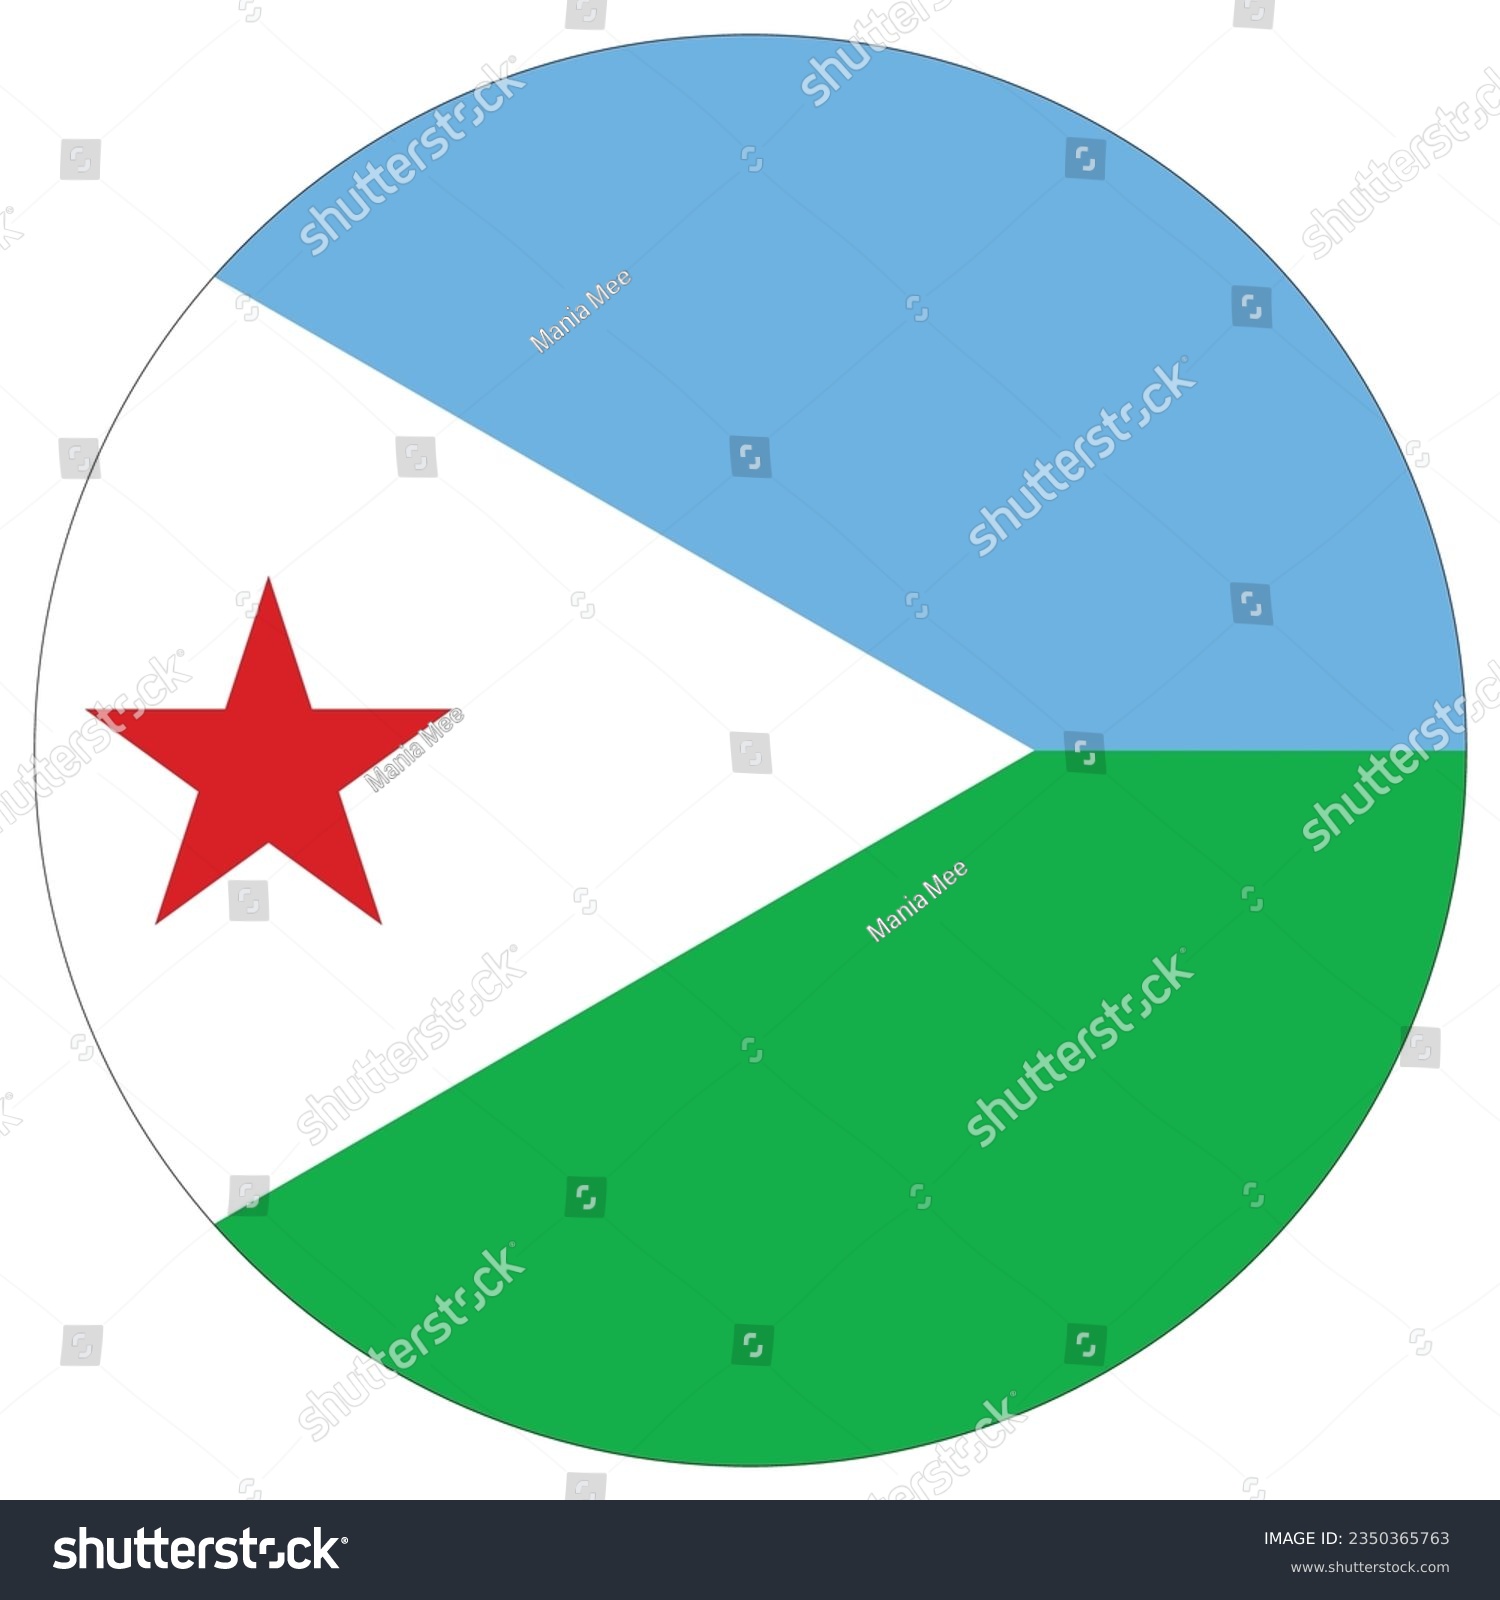 SVG of Djibouti flag in circle. Flag of Djibouti rounded shape svg